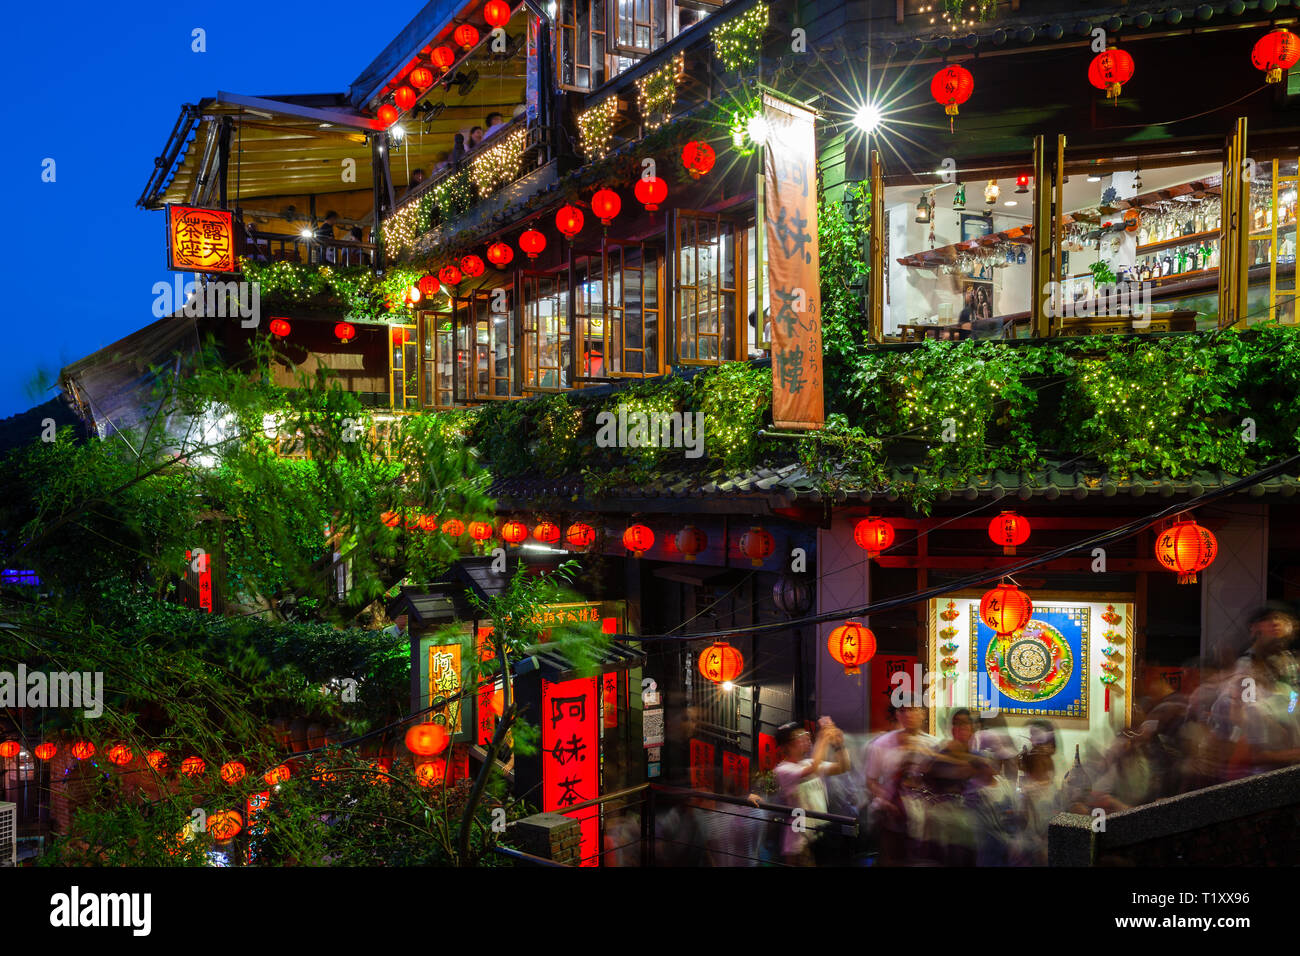 Jiufen, Taiwan - November 7, 2018: Dusk view of the famous old teahouse decorated with Chinese lanterns, Jiufen Old Street, Taiwan on November 07 2018 Stock Photo